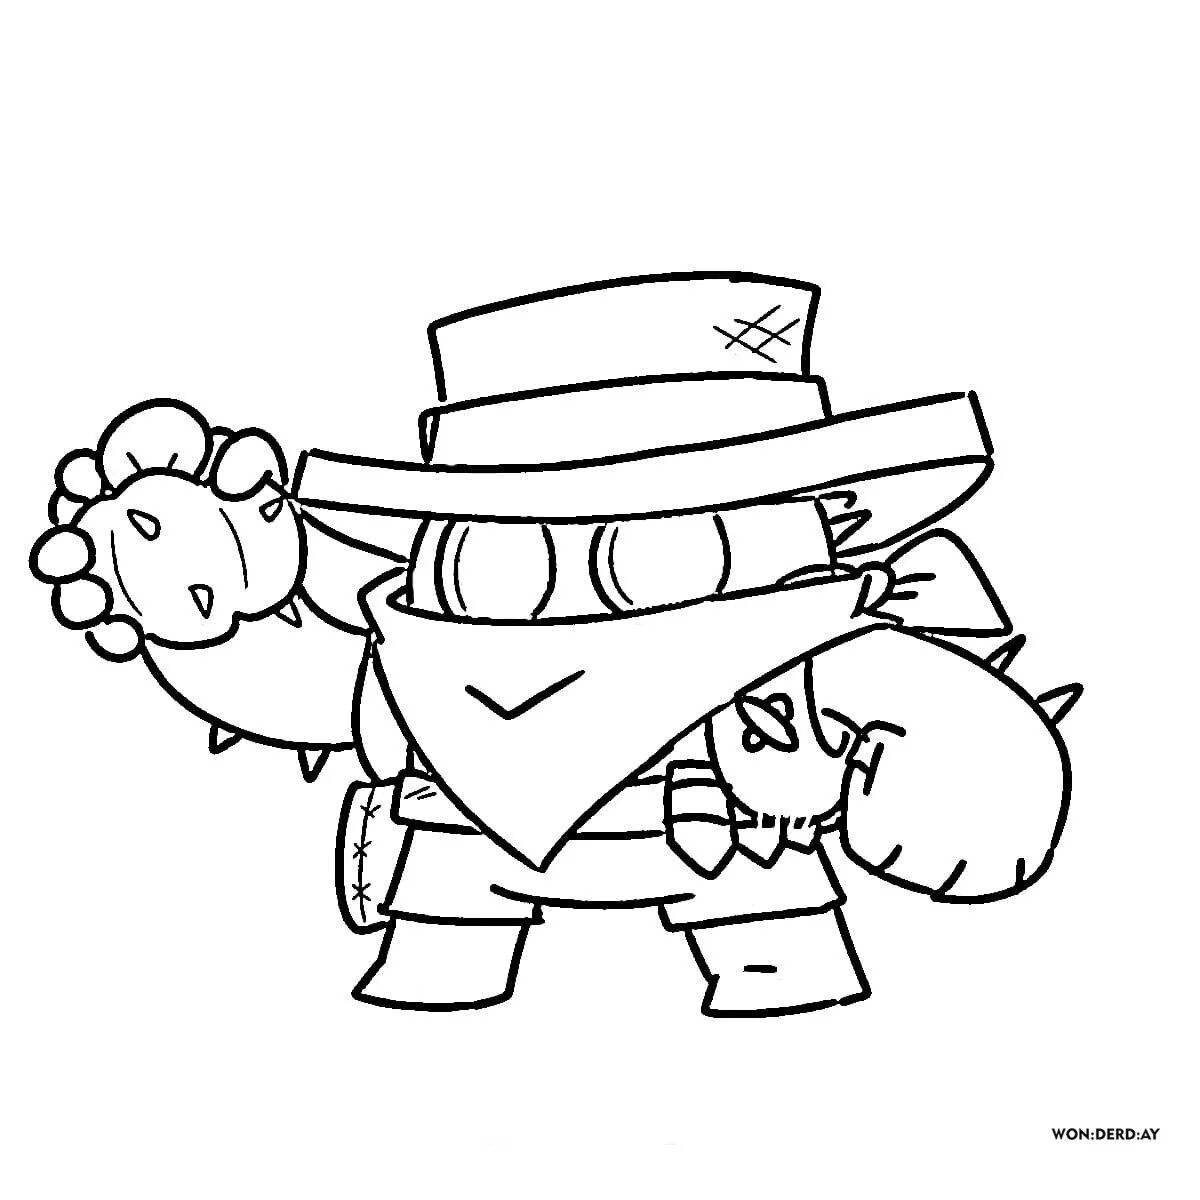 Delightful dynamike coloring page